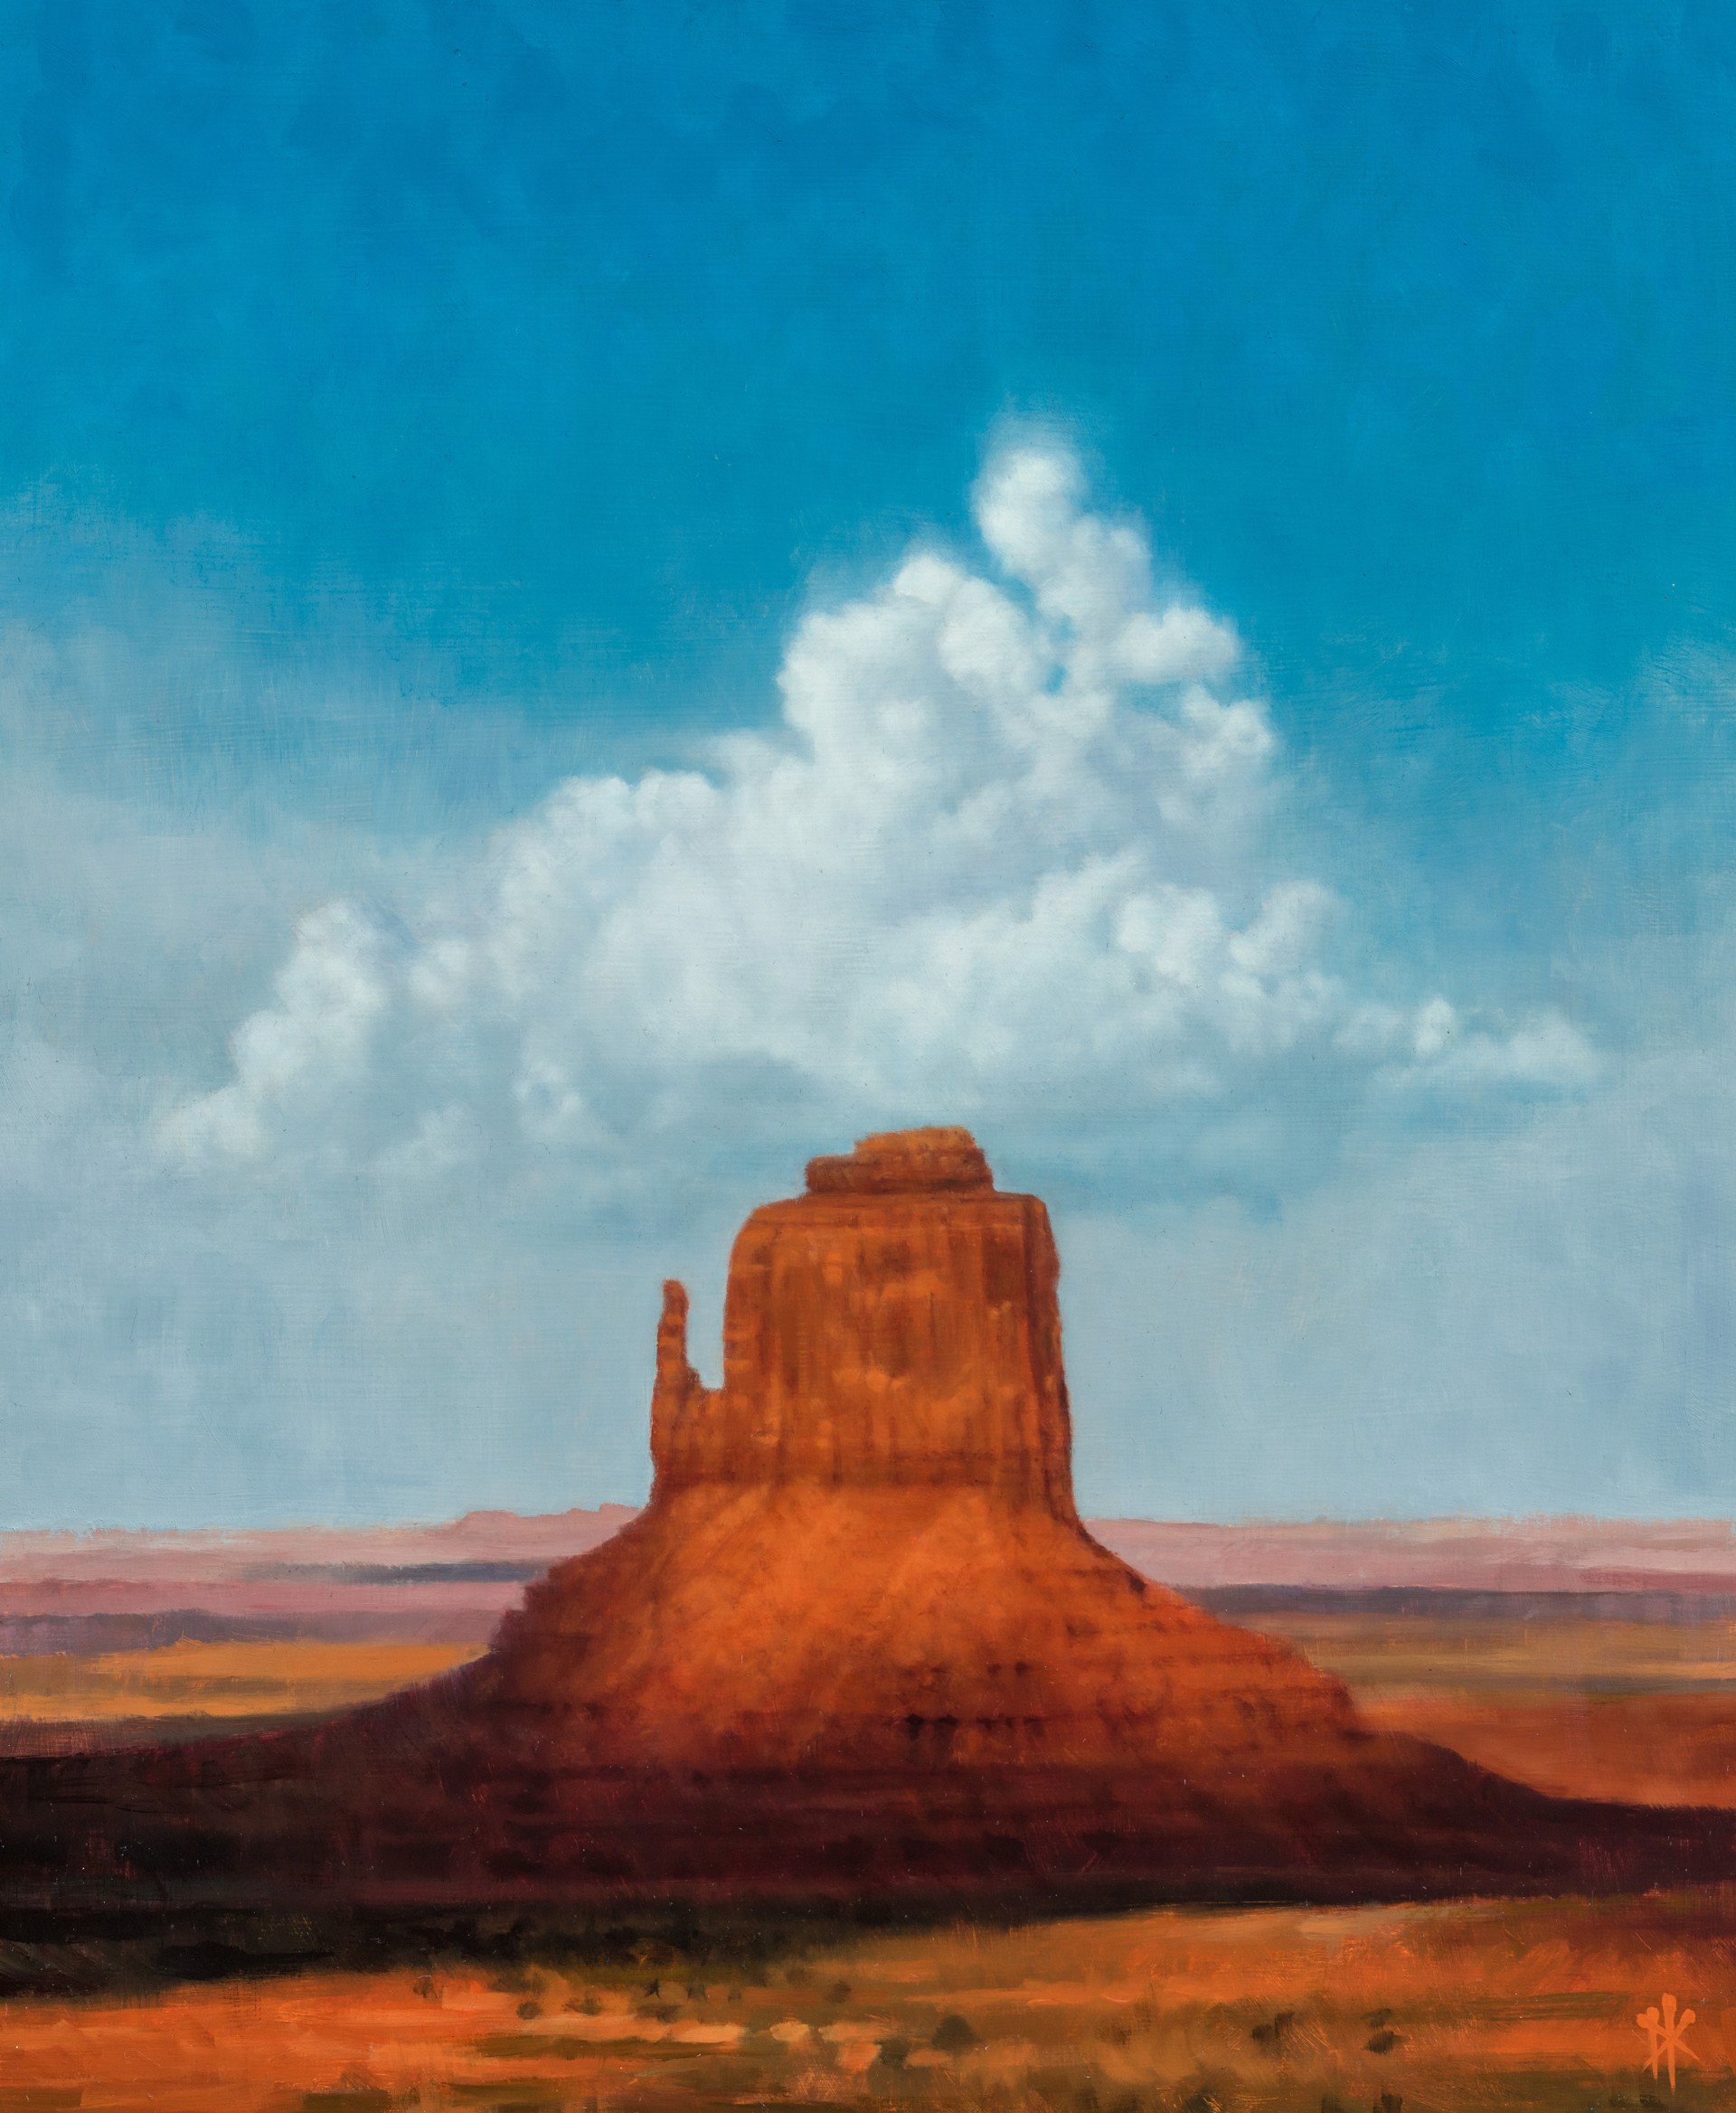 Heaven and Earth (Monument Valley) by Patrick Kramer